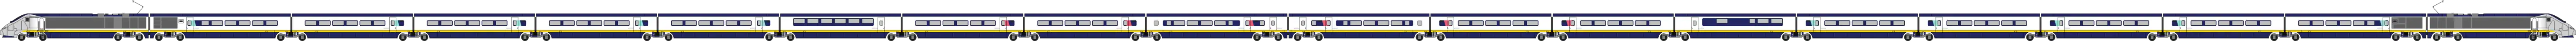 Illustration of a Three Capitals set in original Eurostar livery with SNCF branding